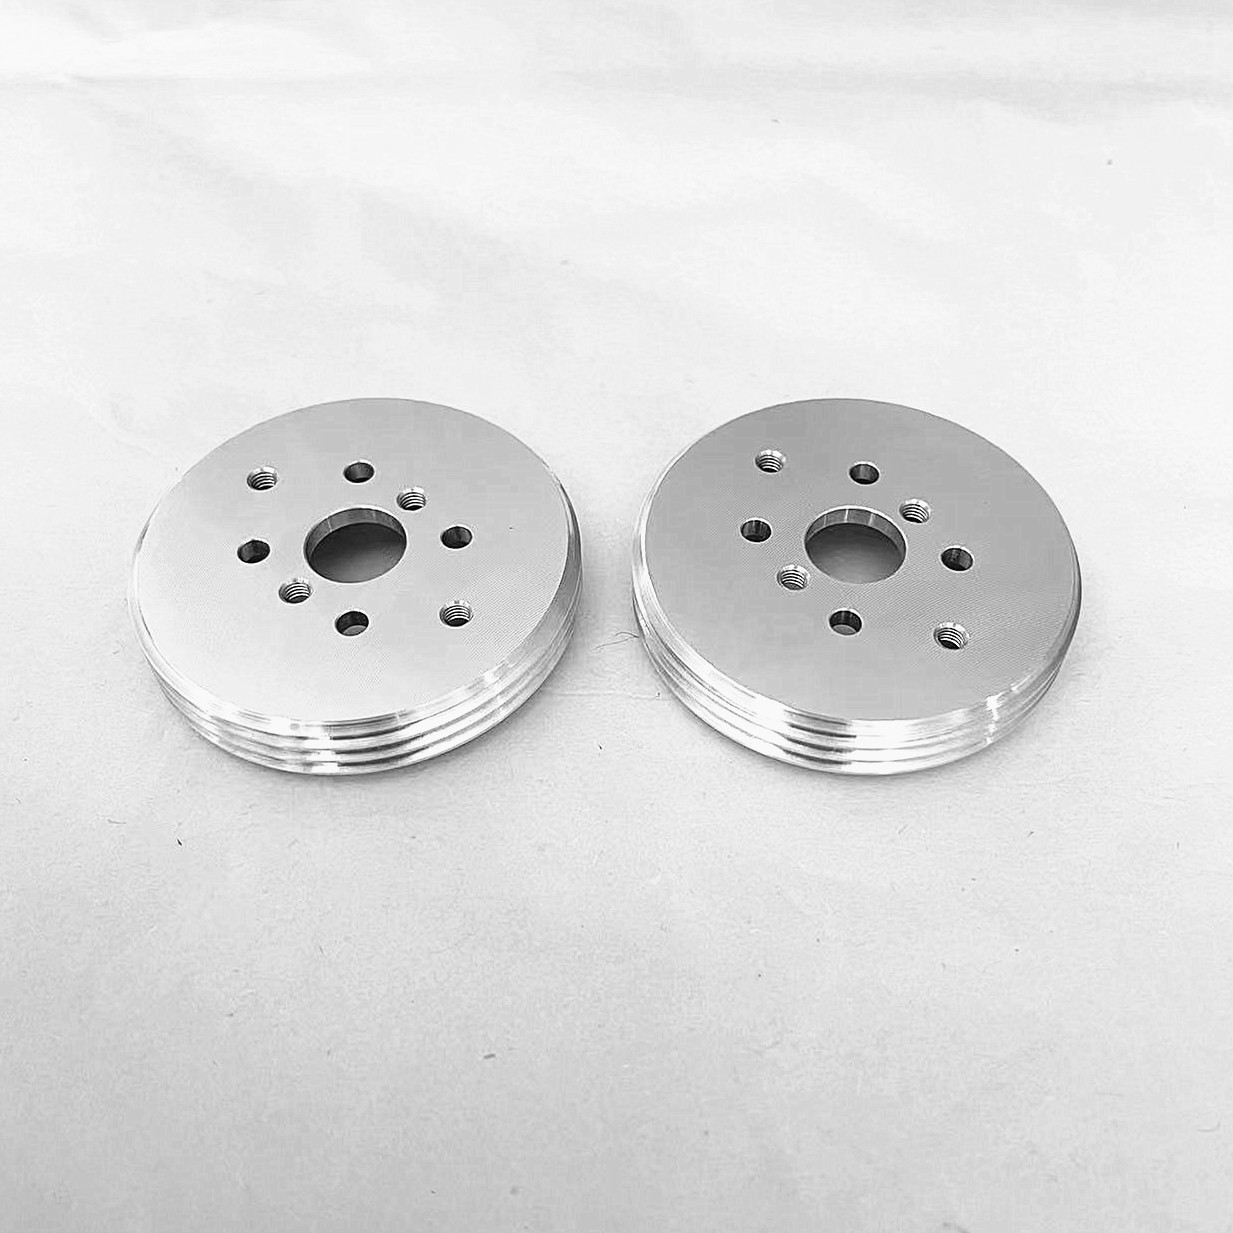 Aluminum Machined Parts for DRONE Components